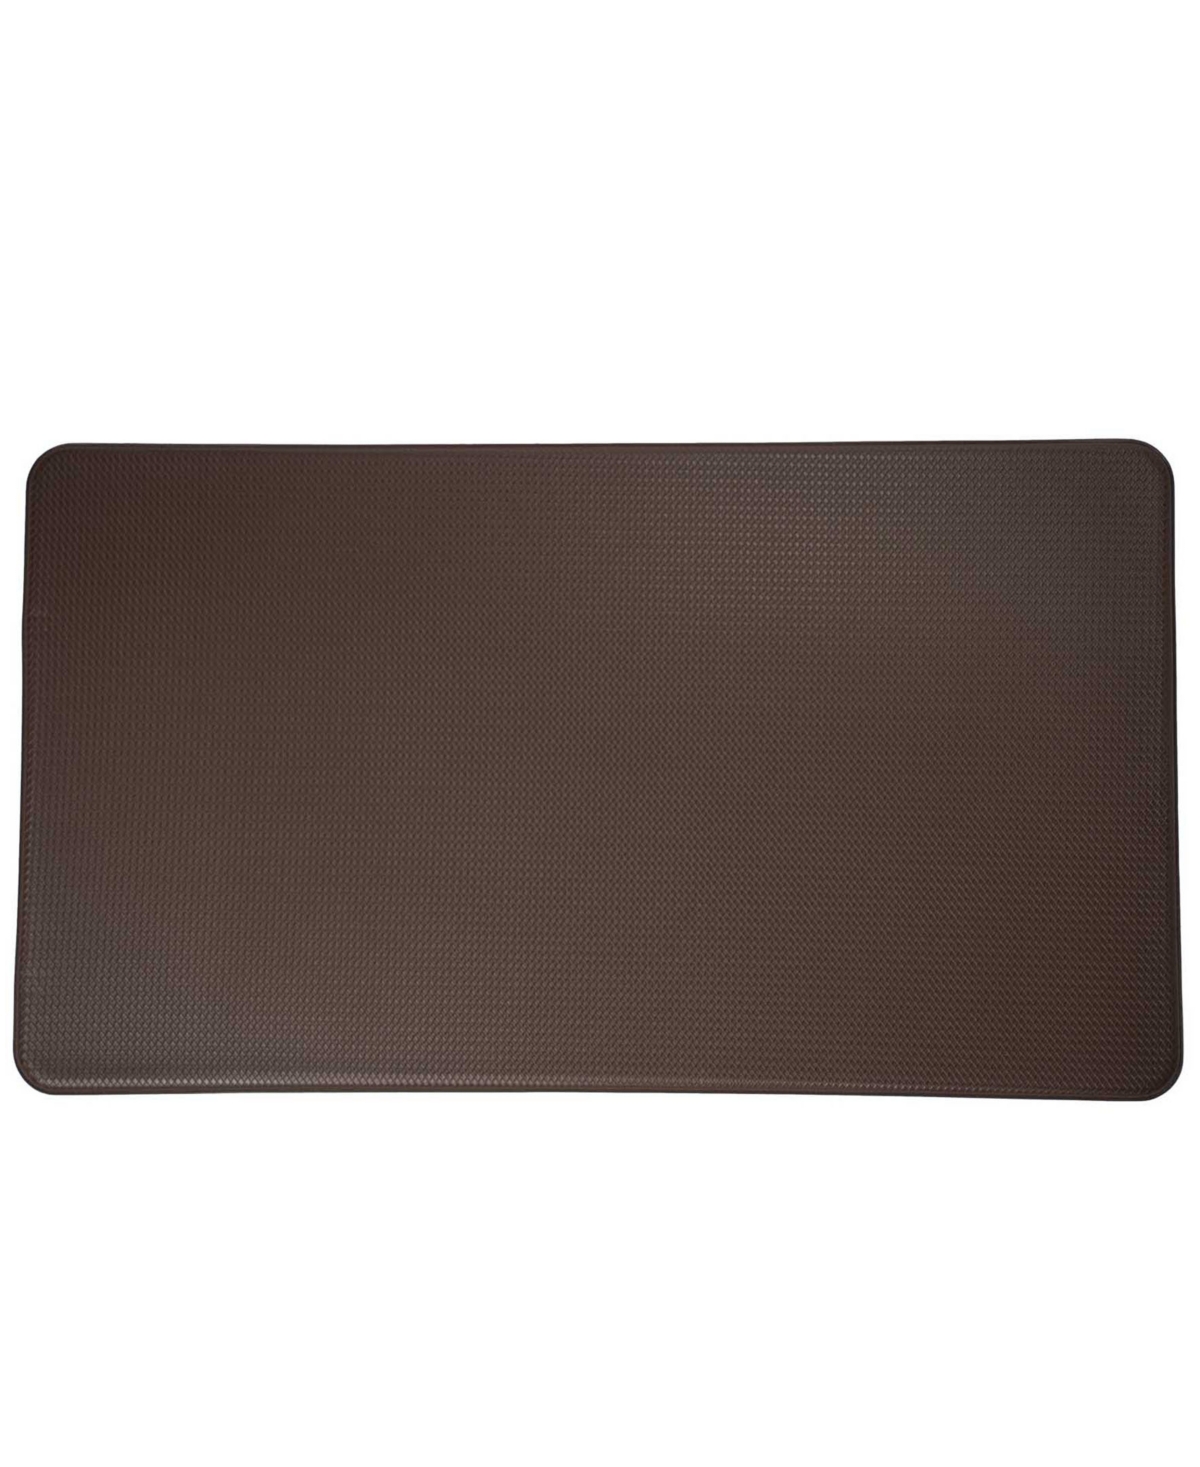 Tommy Bahama 20" X 36" Printed Polyvinyl Chloride Fatigue-resistant Mat In Brown Wide